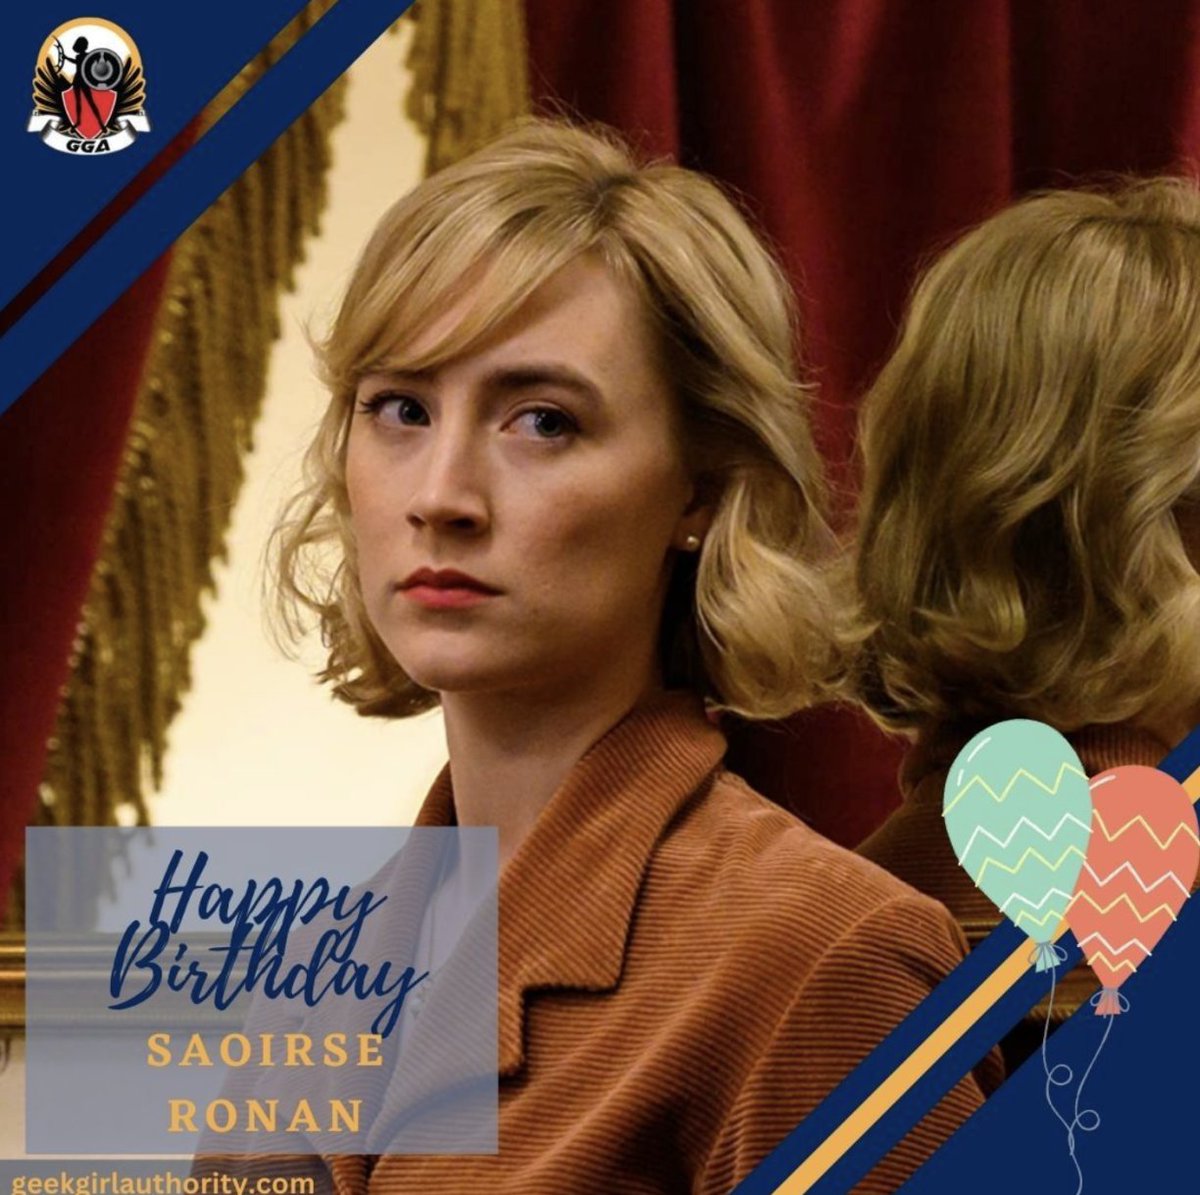 Happy Birthday, Saorise Ronan! Which one of her roles is your favorite?